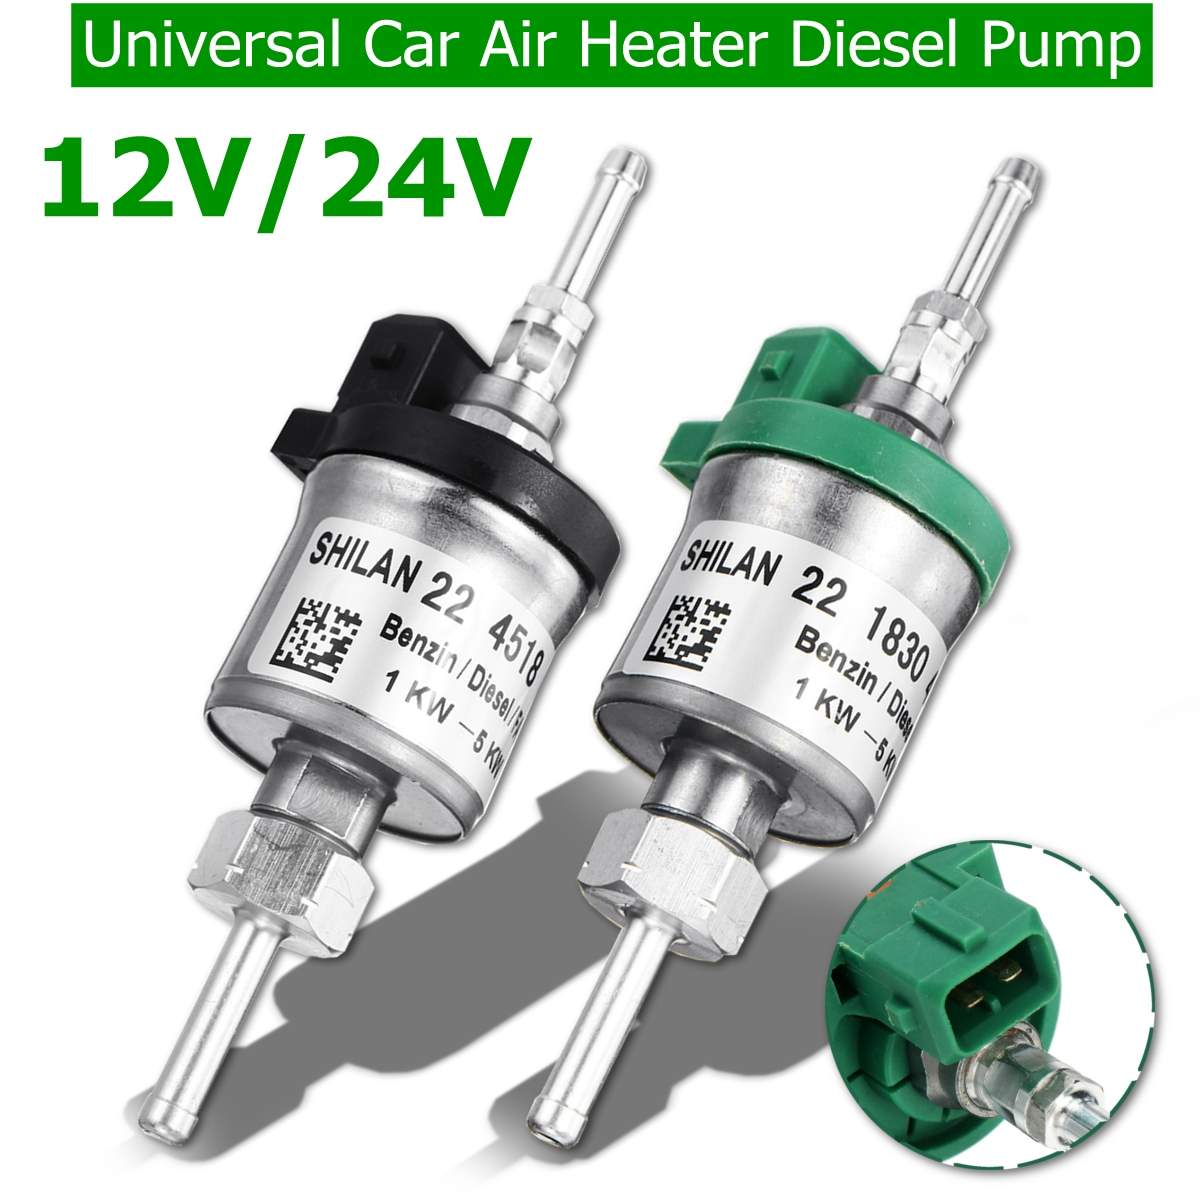 12V/24V 1000W- 5000W Universal Car Heater Oil Fuel Diesel Pump Air Parking  Heater Car Styling Accessories - Price history & Review, AliExpress Seller  - Hcalory Official Store